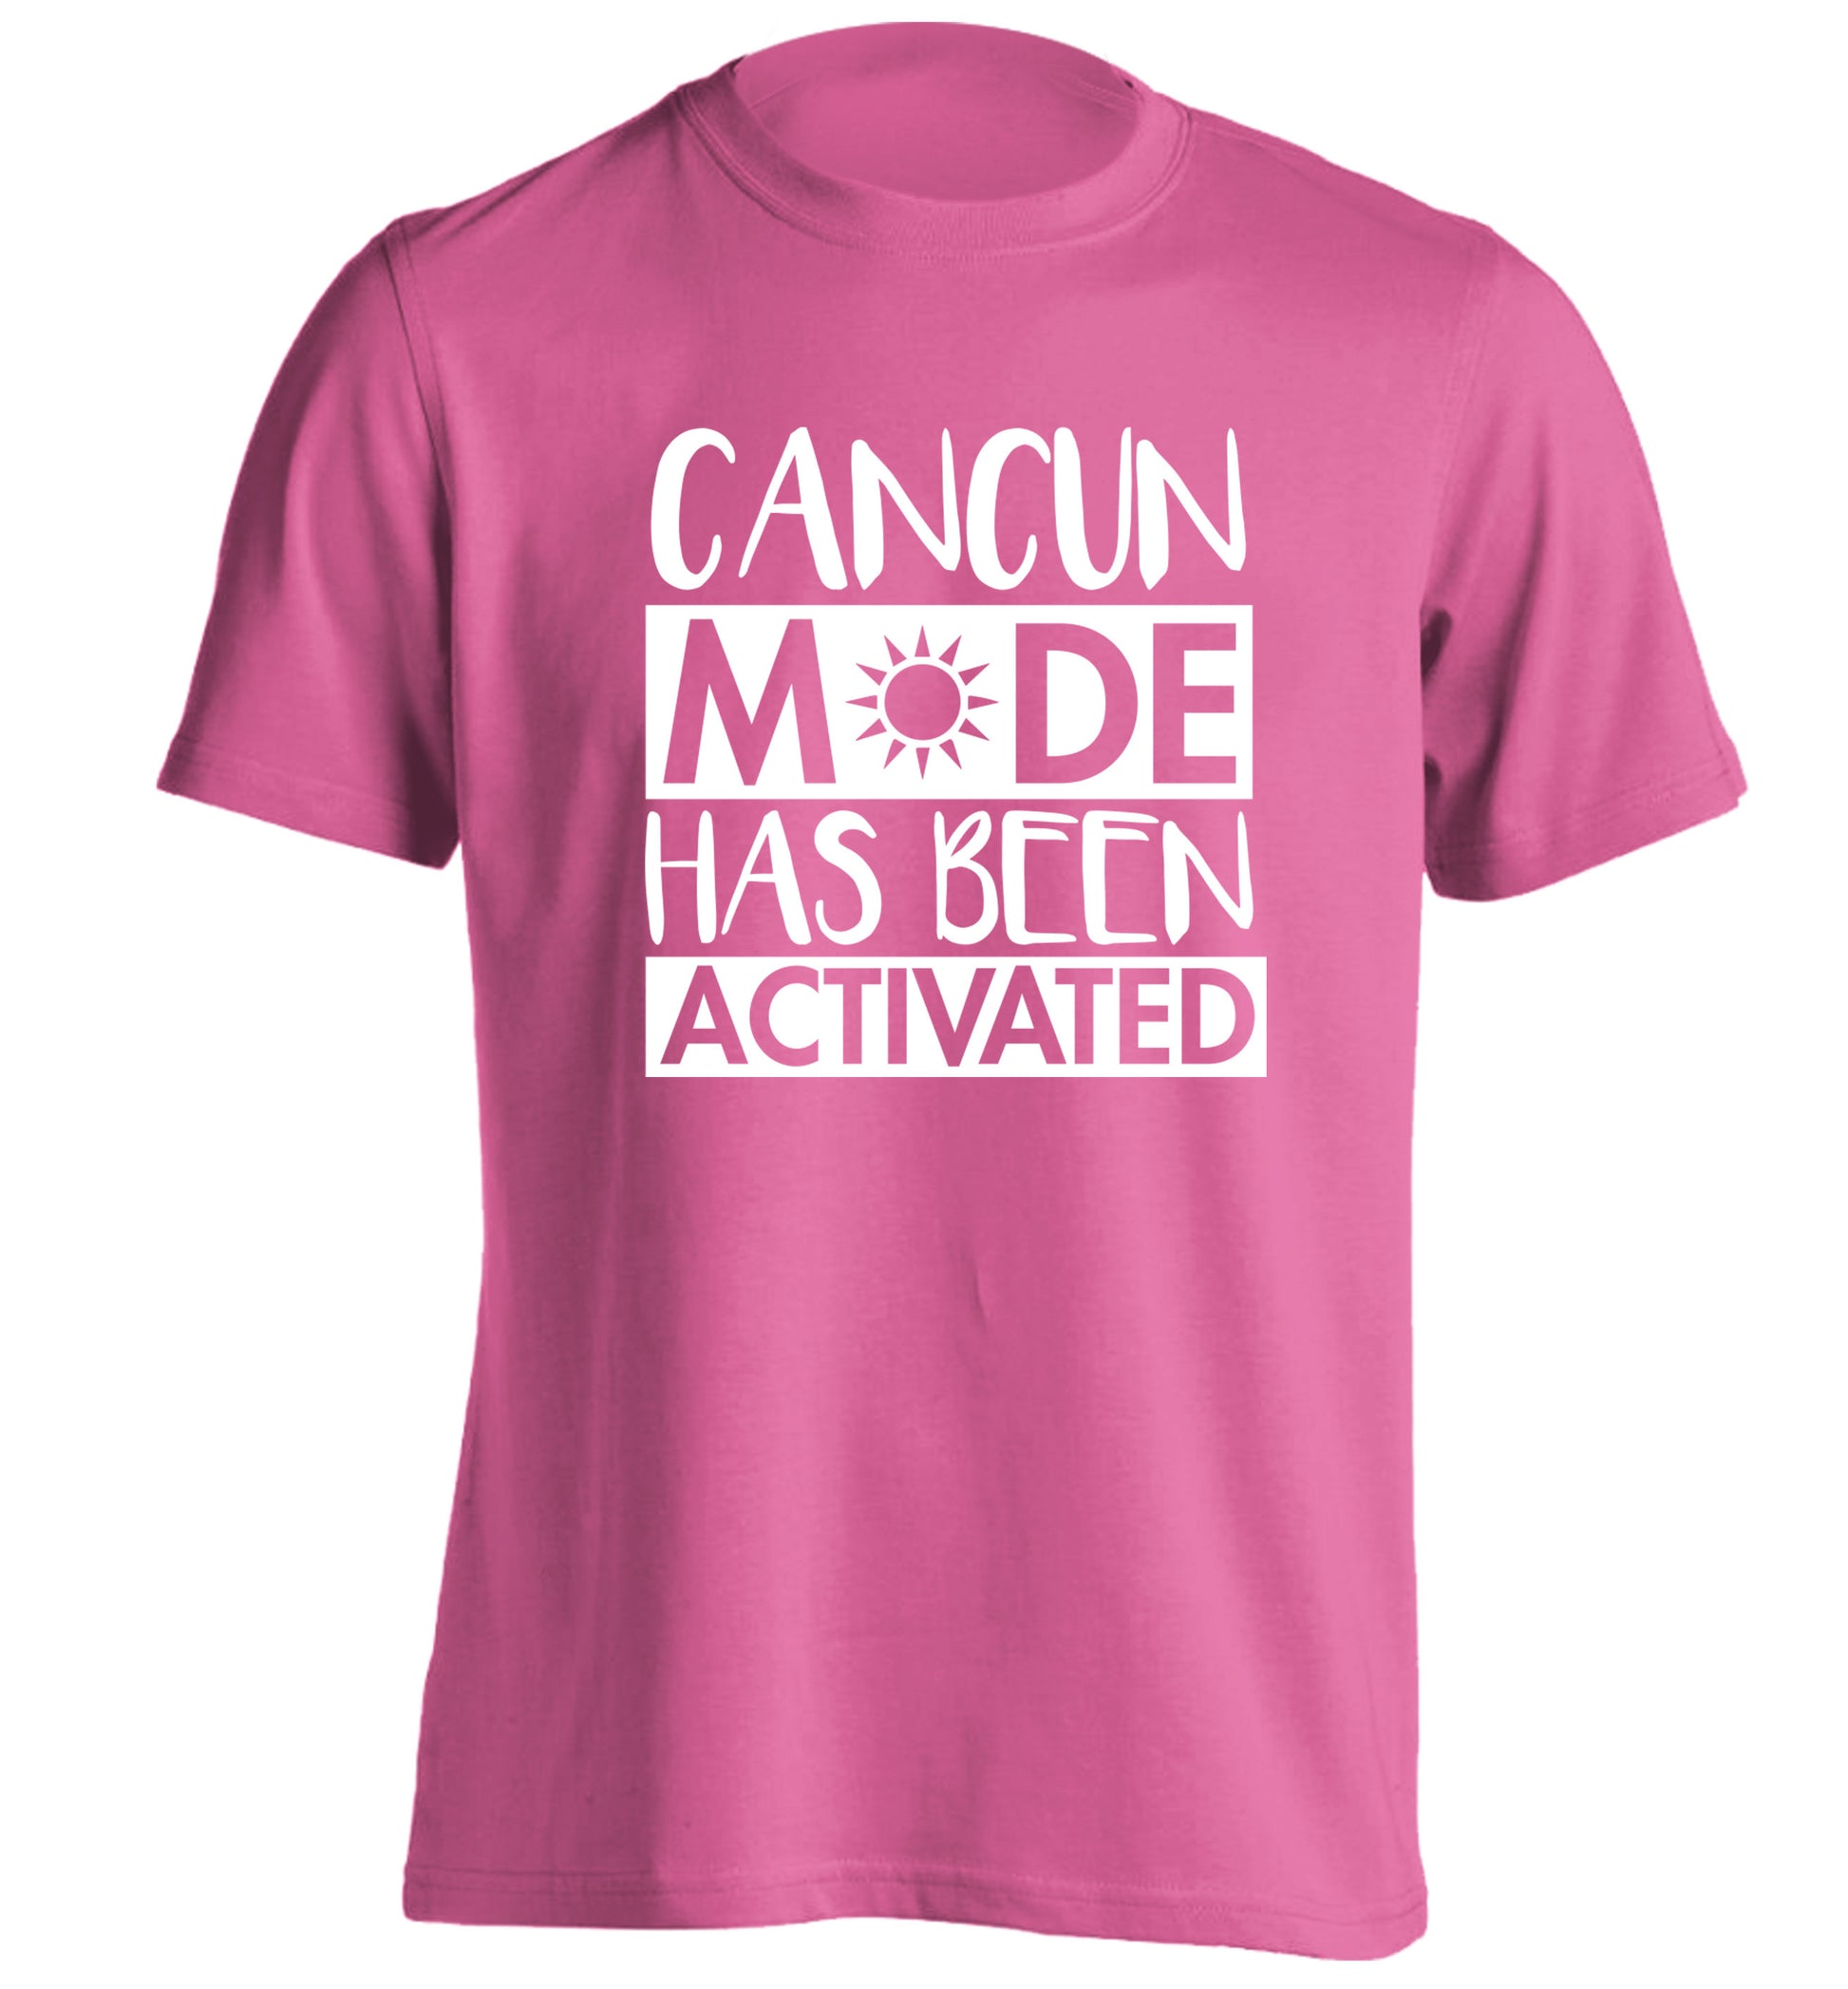 Cancun mode has been activated adults unisex pink Tshirt 2XL